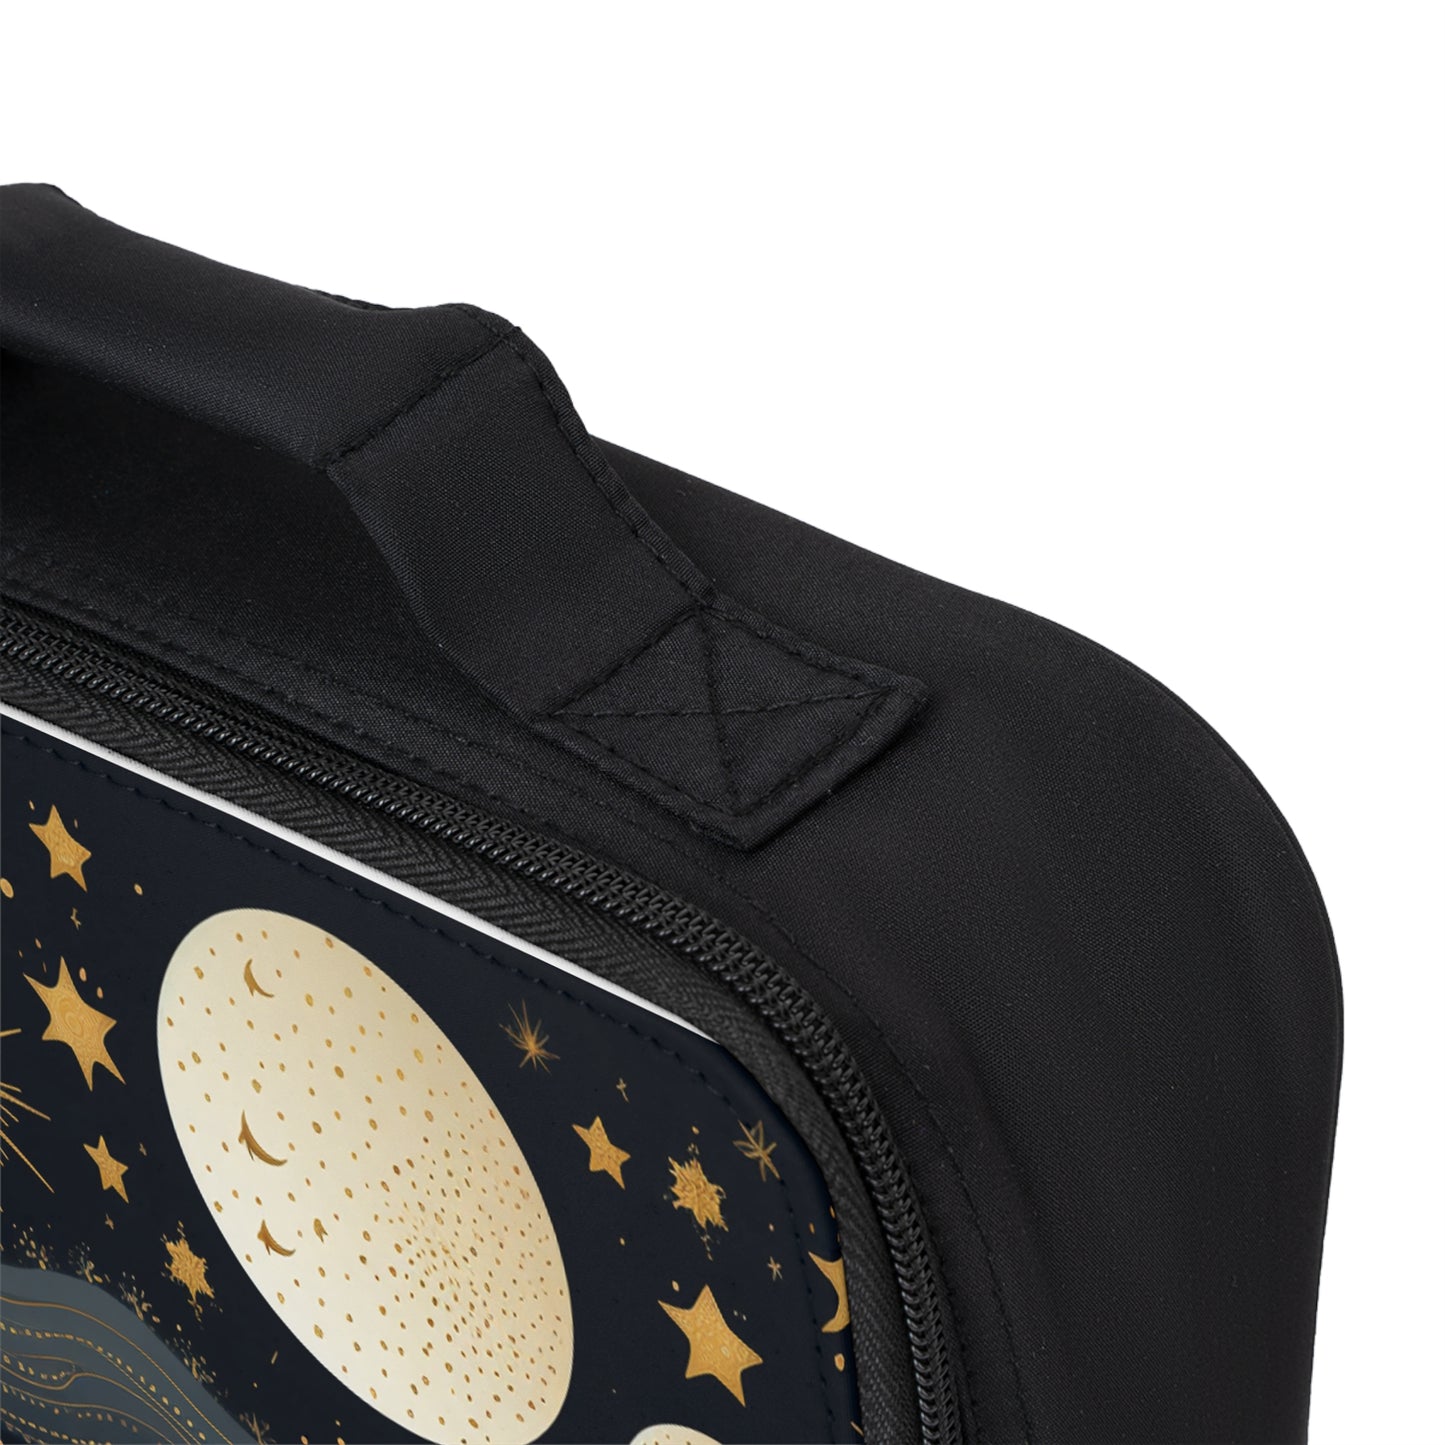 Celestial Moon Lunch Bag | Cosmic Stars, Sun, Galaxies Lunch Accessories